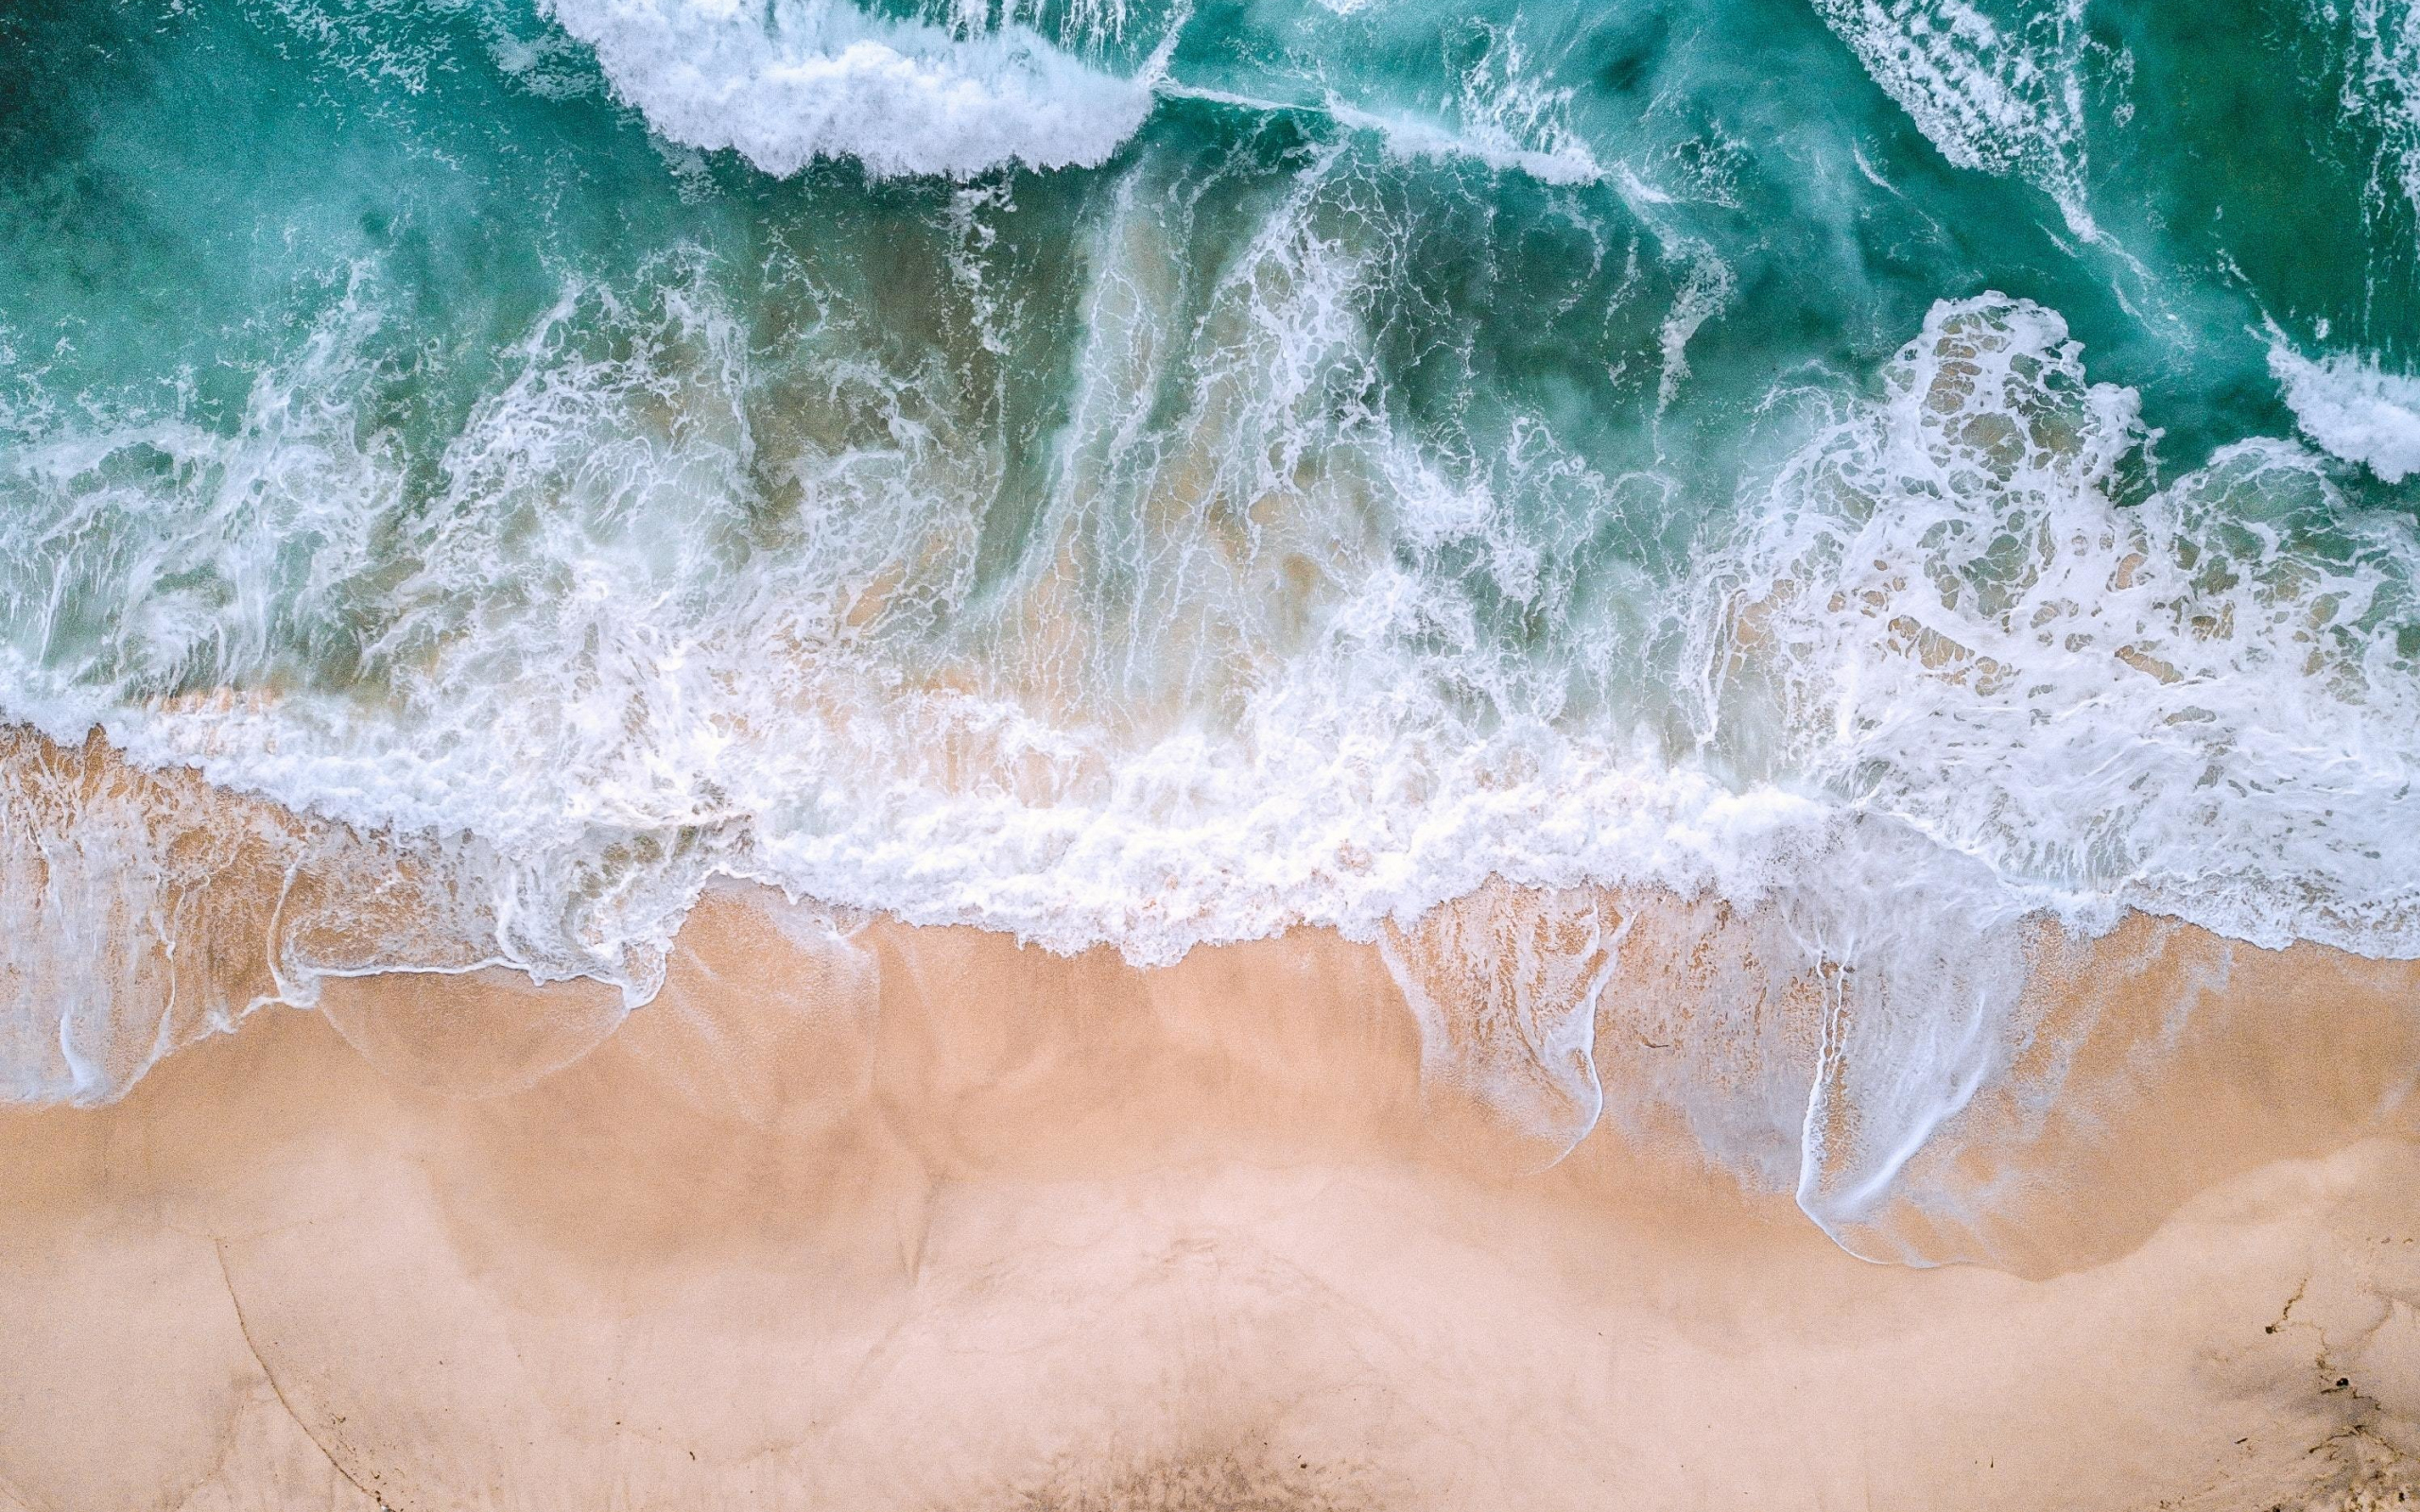 Download wallpaper x aerial view sea waves beach green white dual wide x hd background